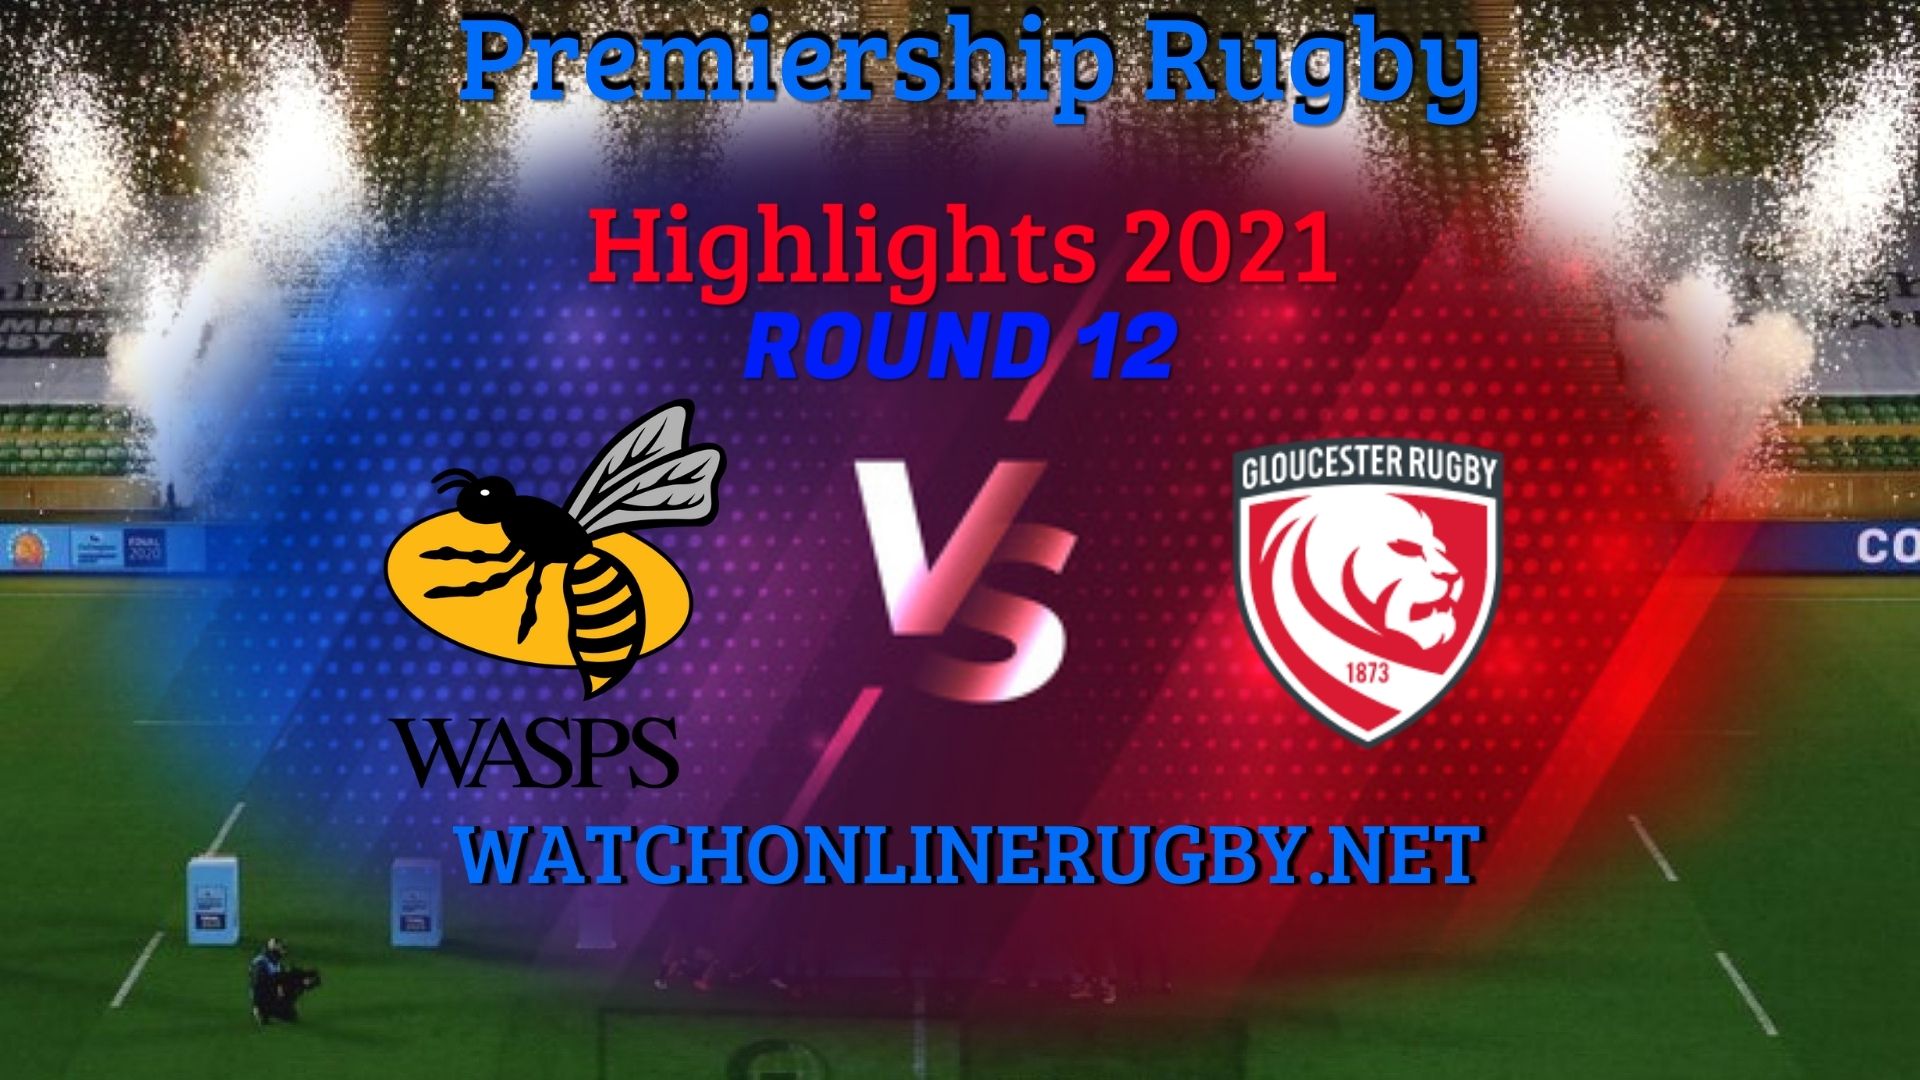 Wasps Vs Gloucester Rugby Premiership Rugby 2021 RD 12